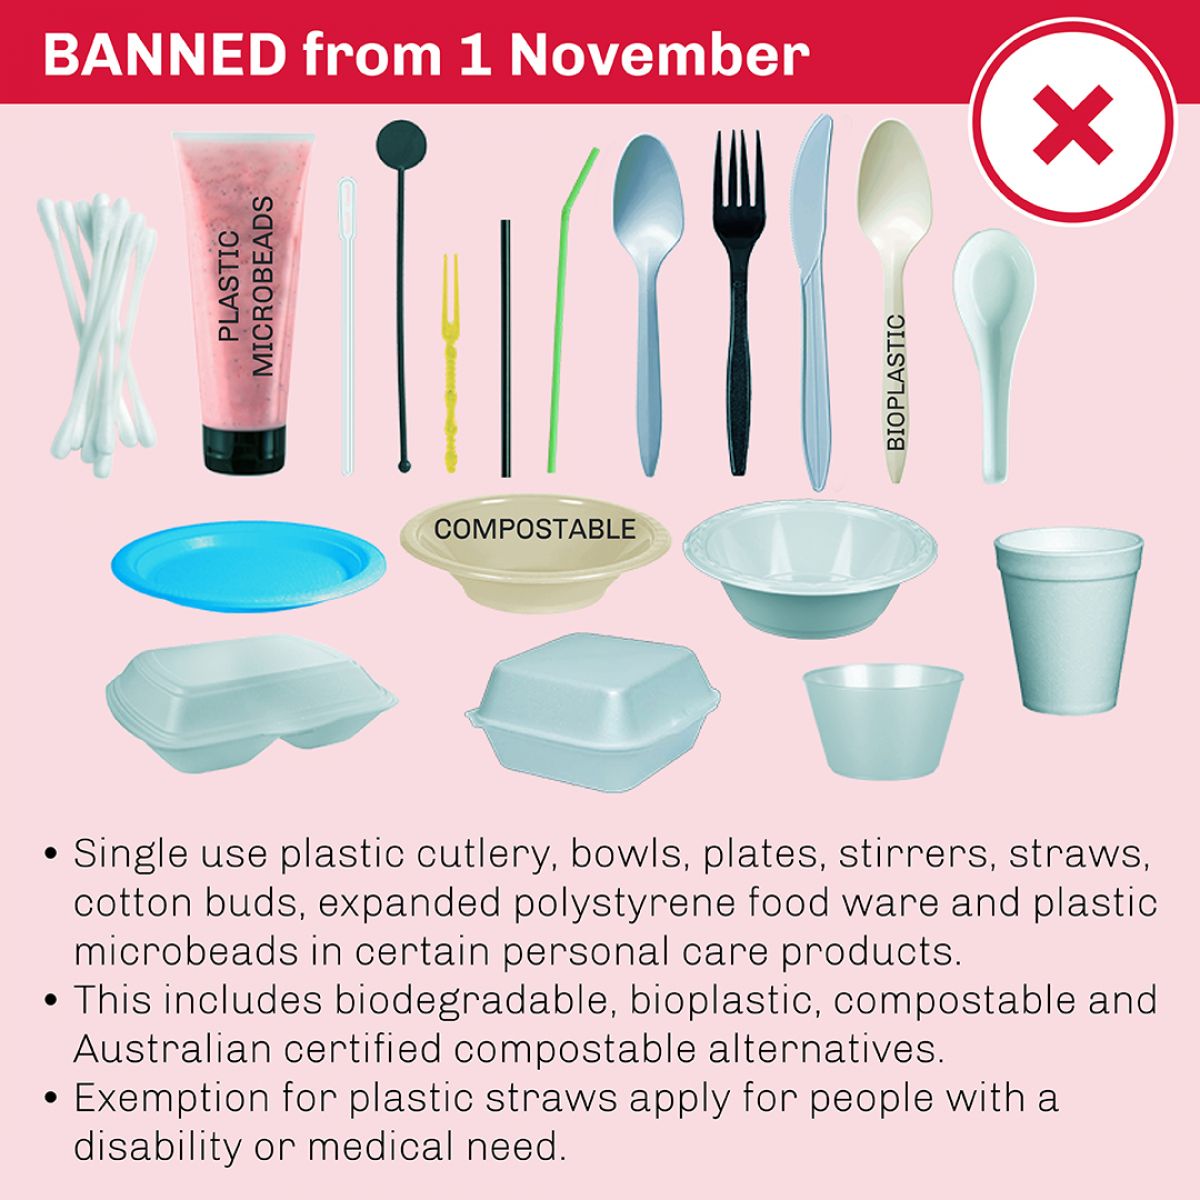 A depiction of banned single-use plastic items